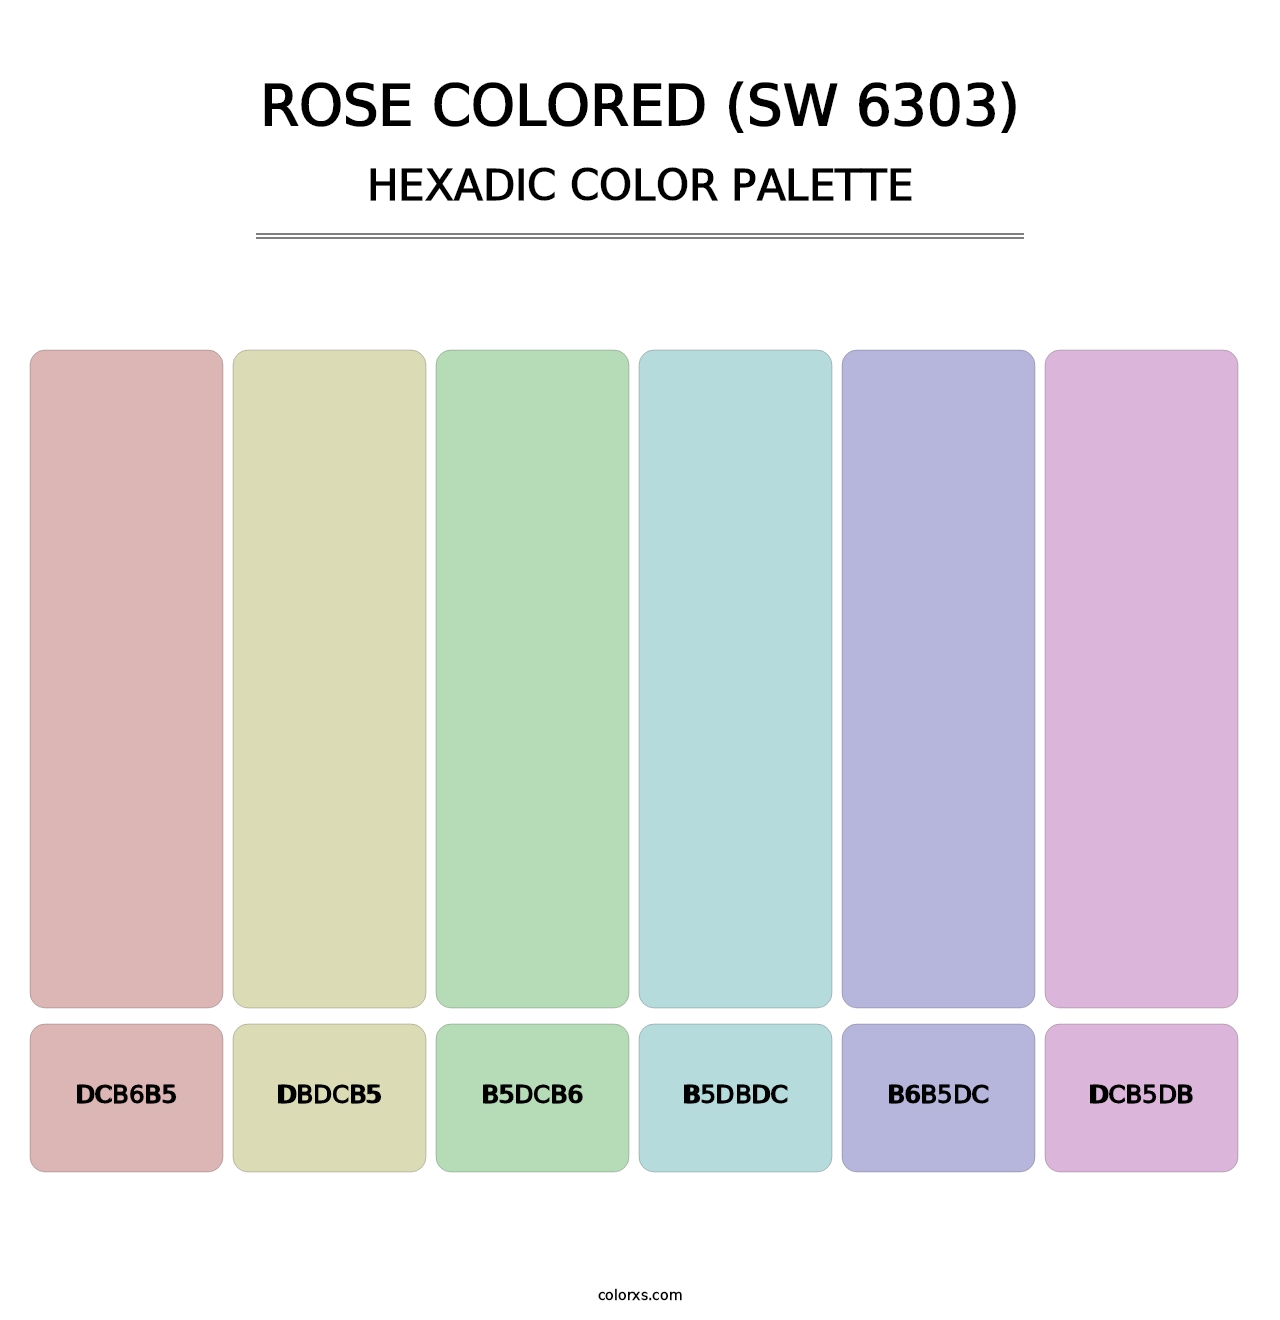 Rose Colored (SW 6303) - Hexadic Color Palette